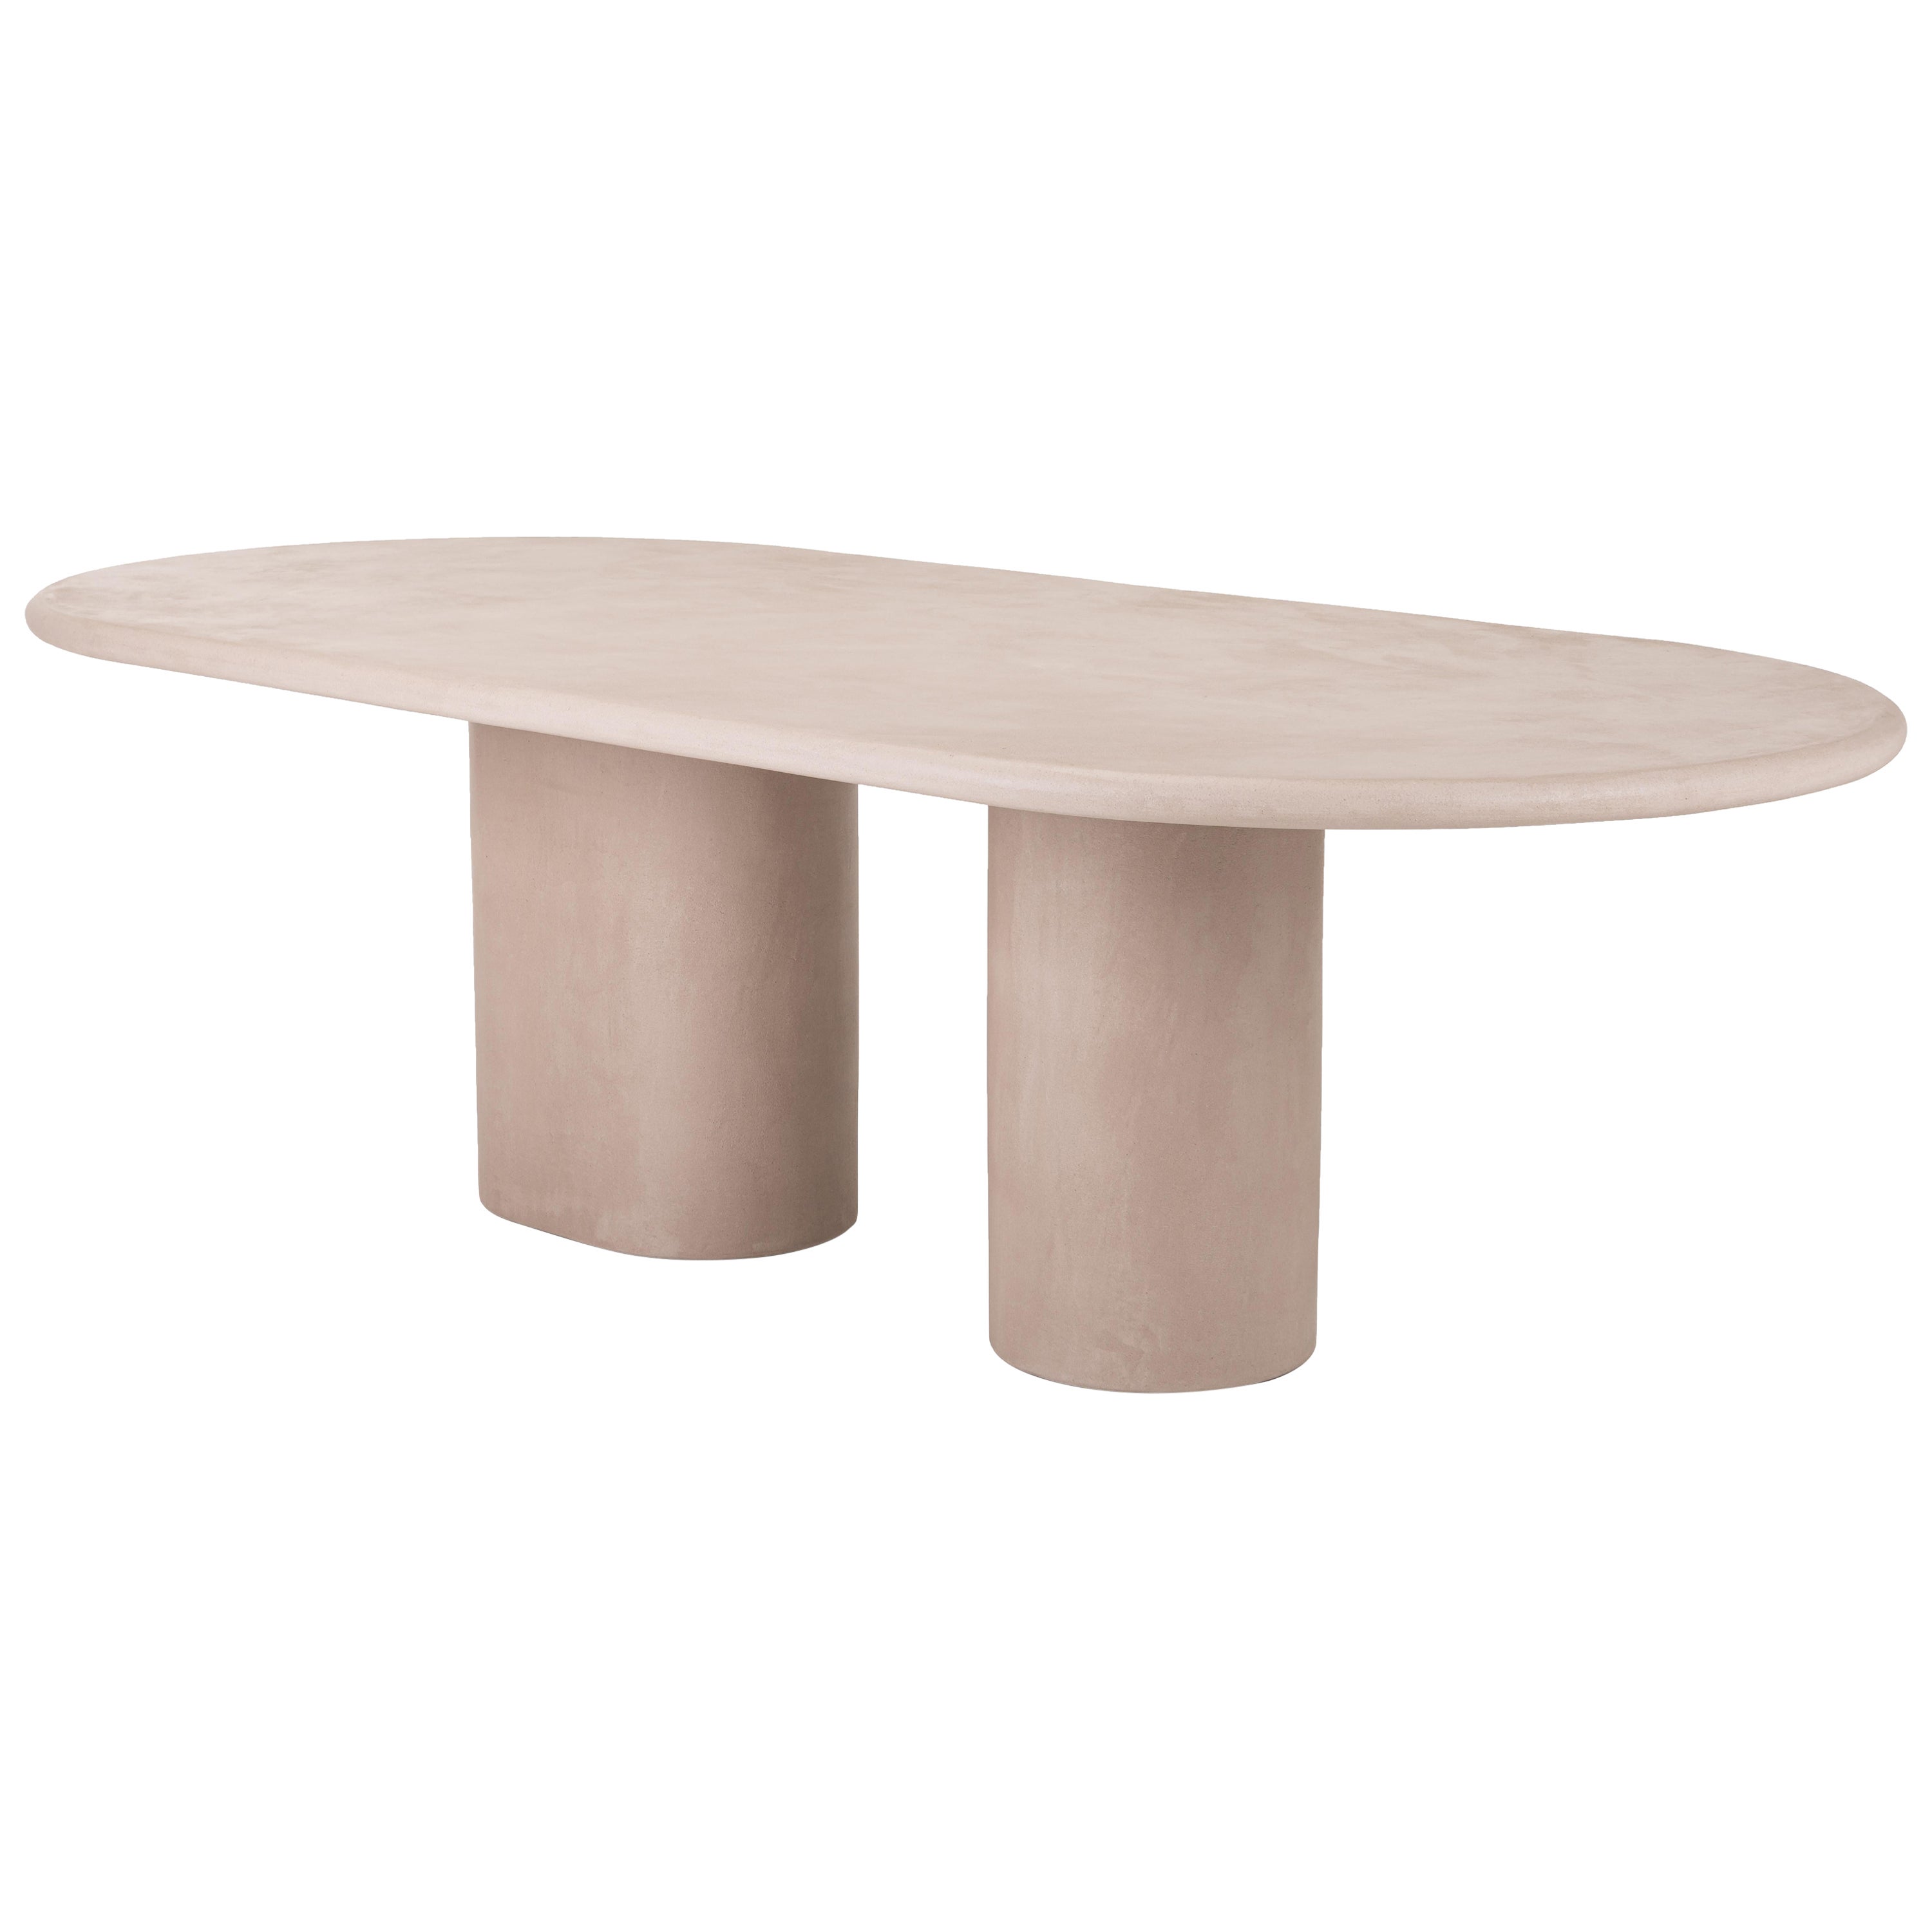 Natural Plaster Dining Table "Column" 260 by Isabelle Beaumont For Sale